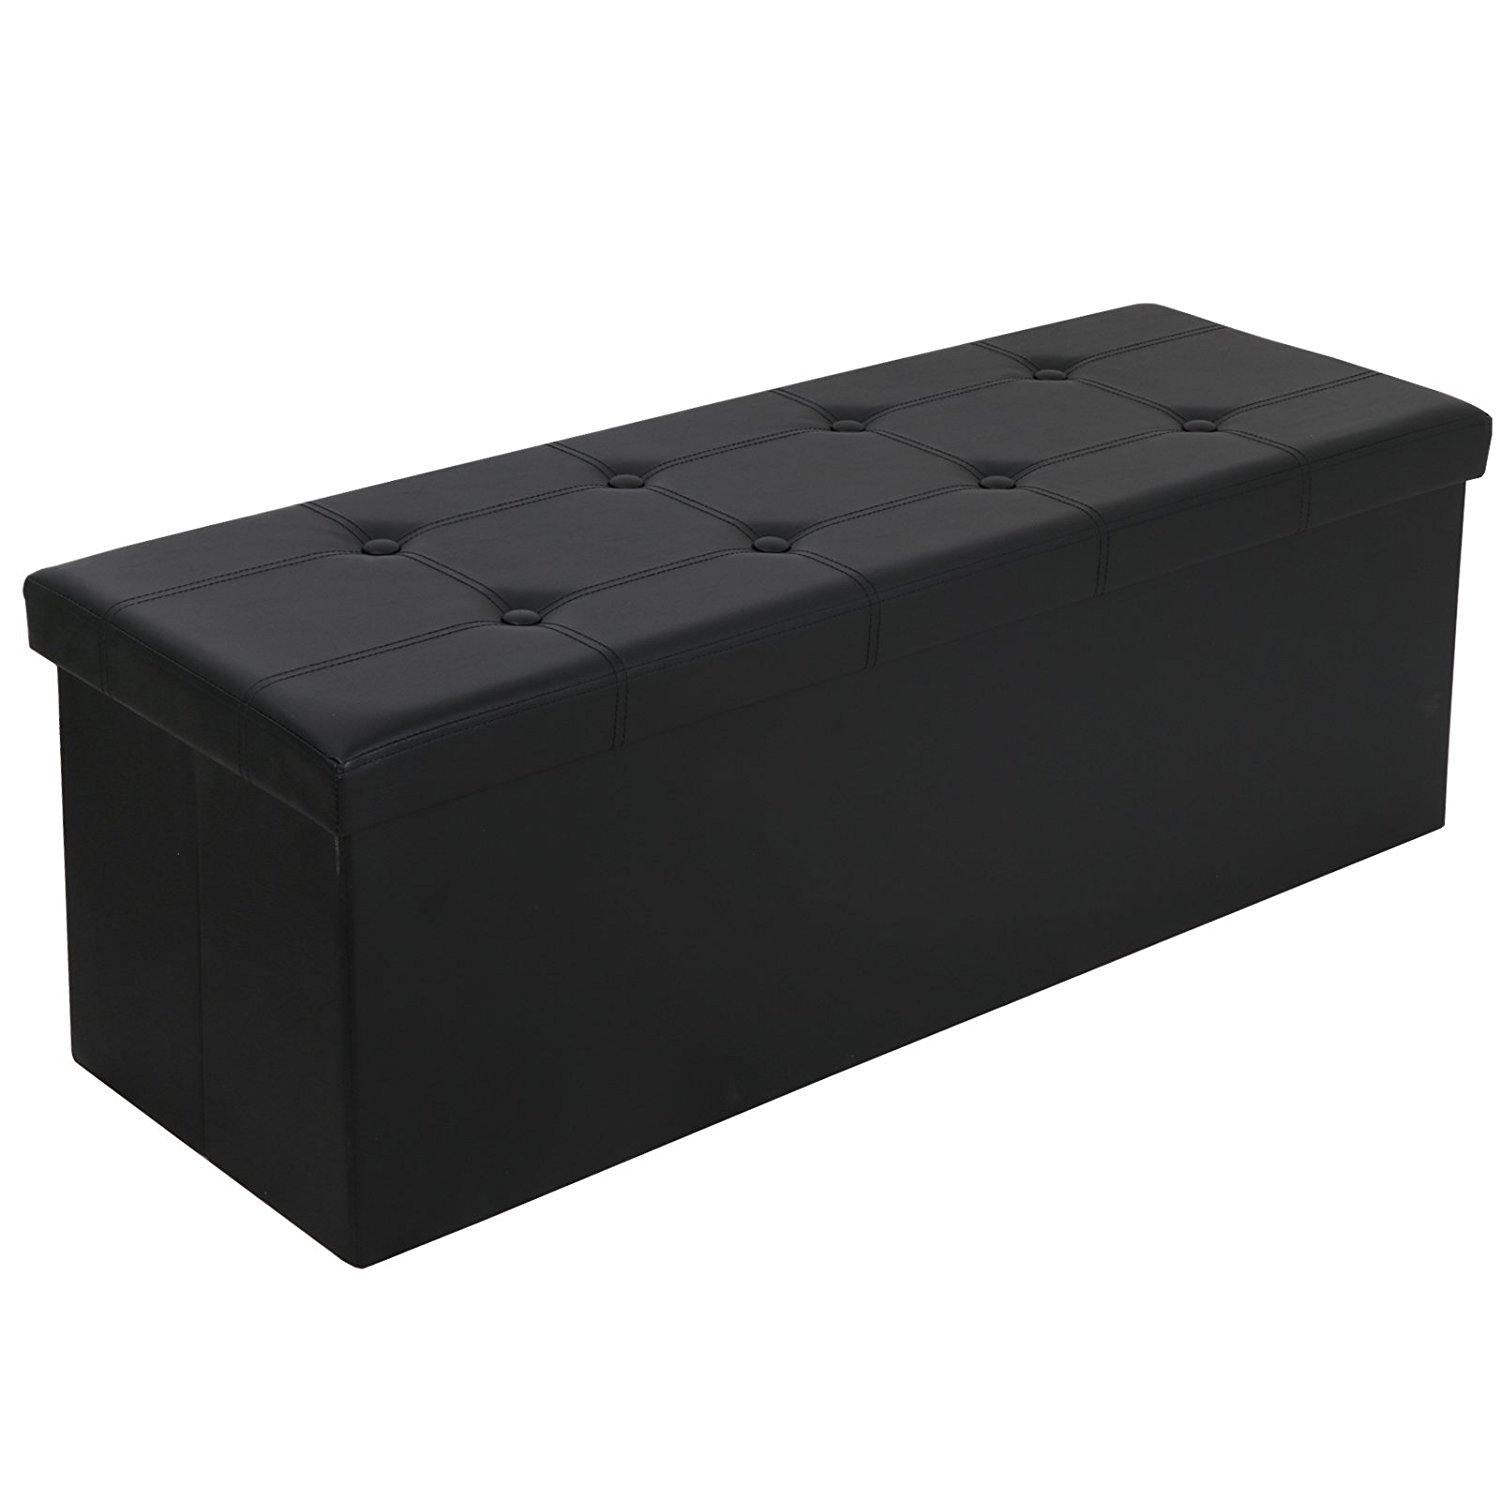 ZENY? 43in Long Faux Leather Large Folding Ottoman Storage Bench Foot Rest Stool Seat (Black)